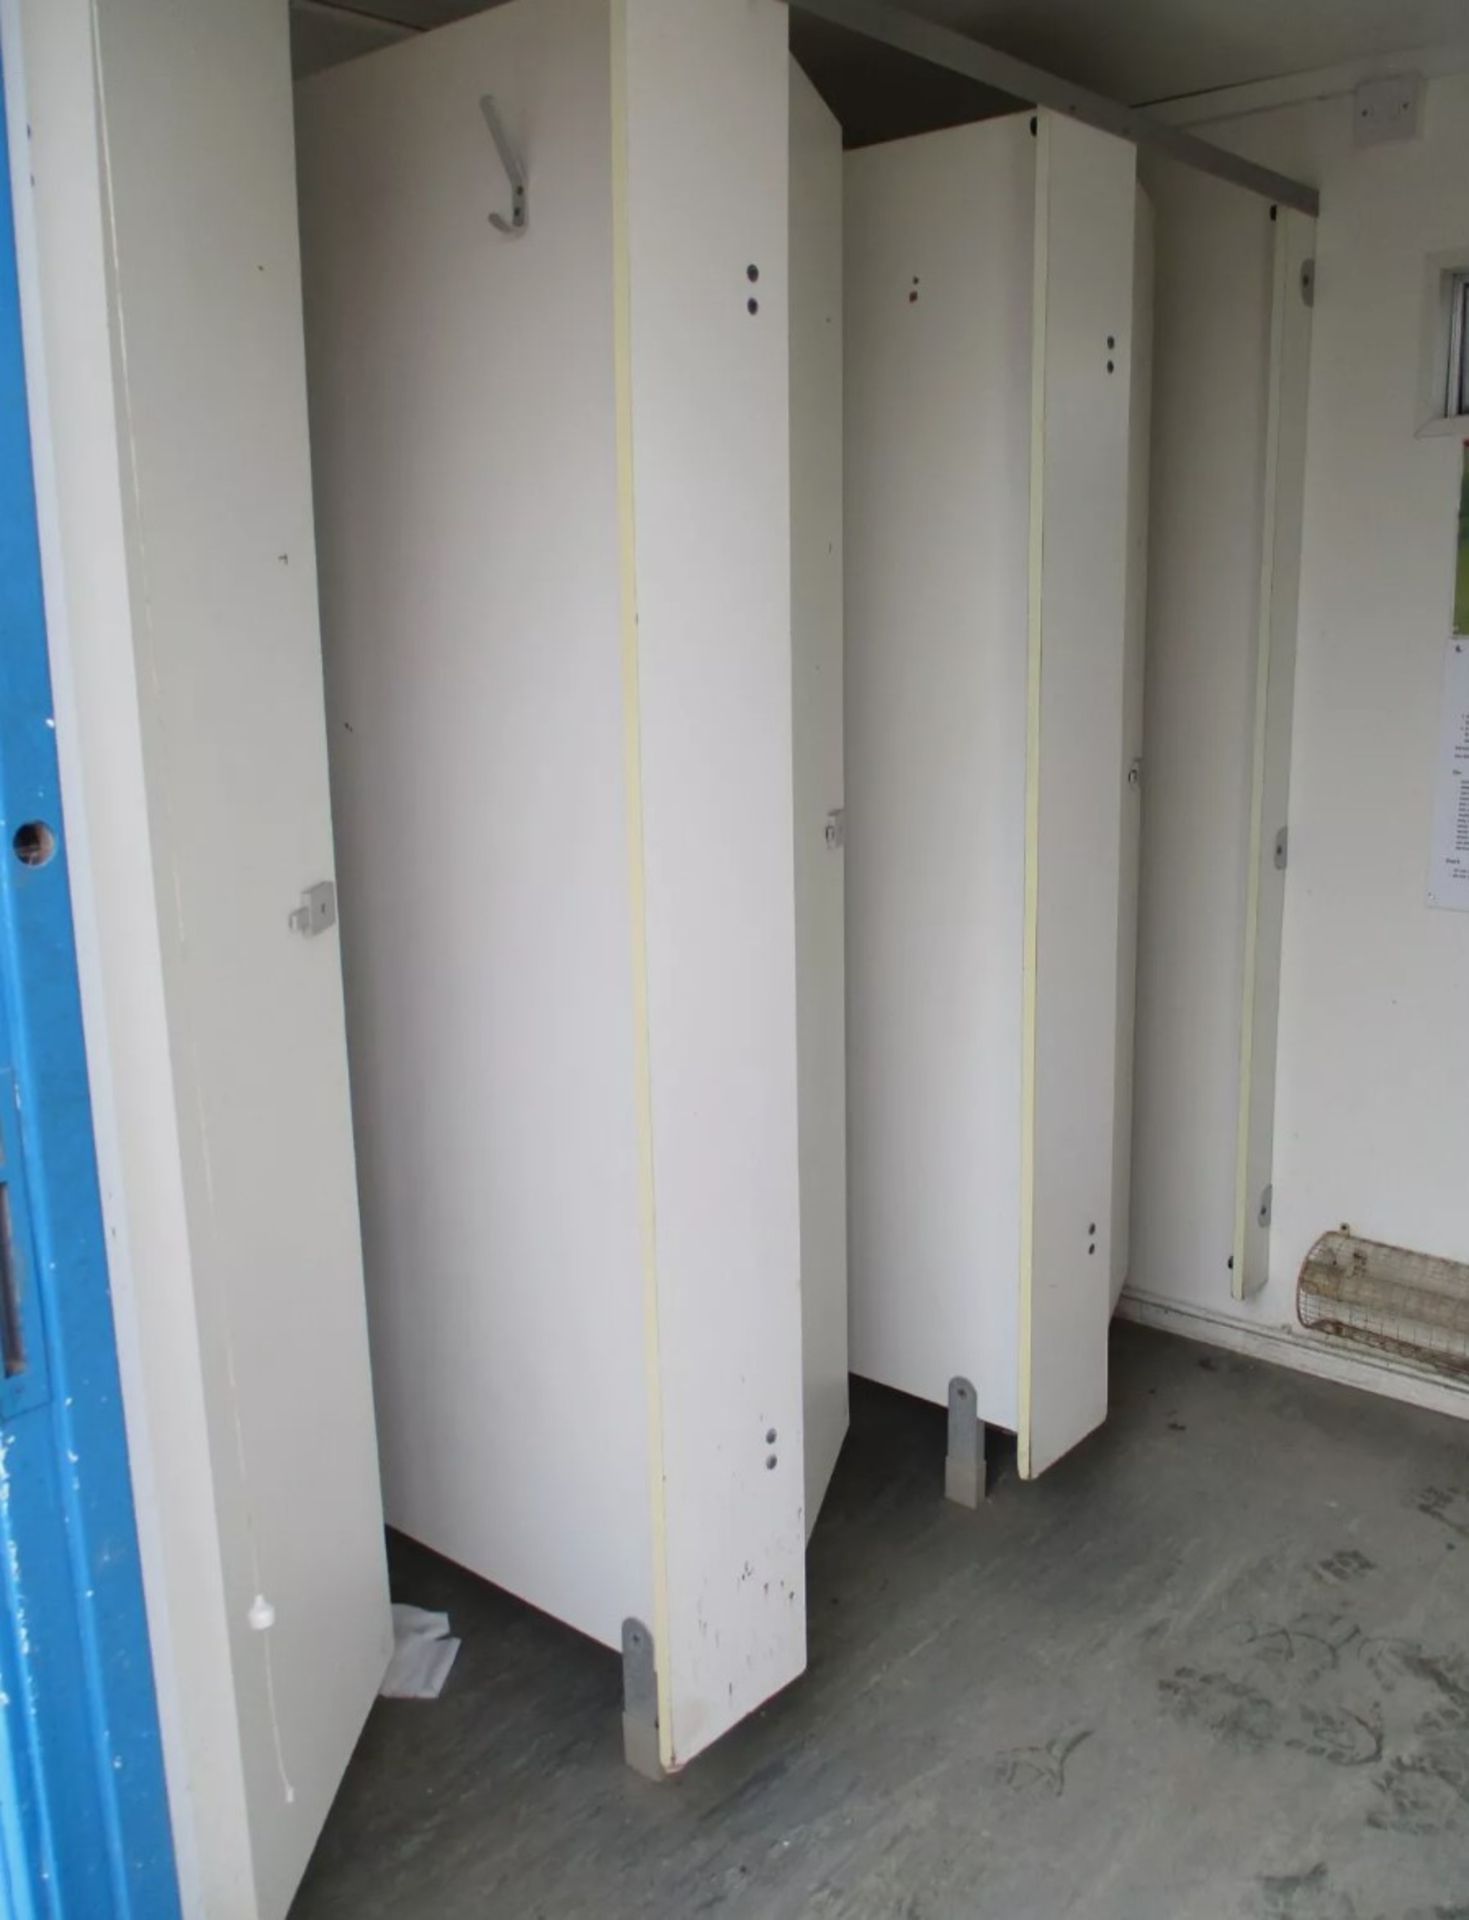 SHIPPING CONTAINER TOILET BLOCK: YOUR COMPLETE PORTABLE SANITATION SOLUTION - Image 11 of 11